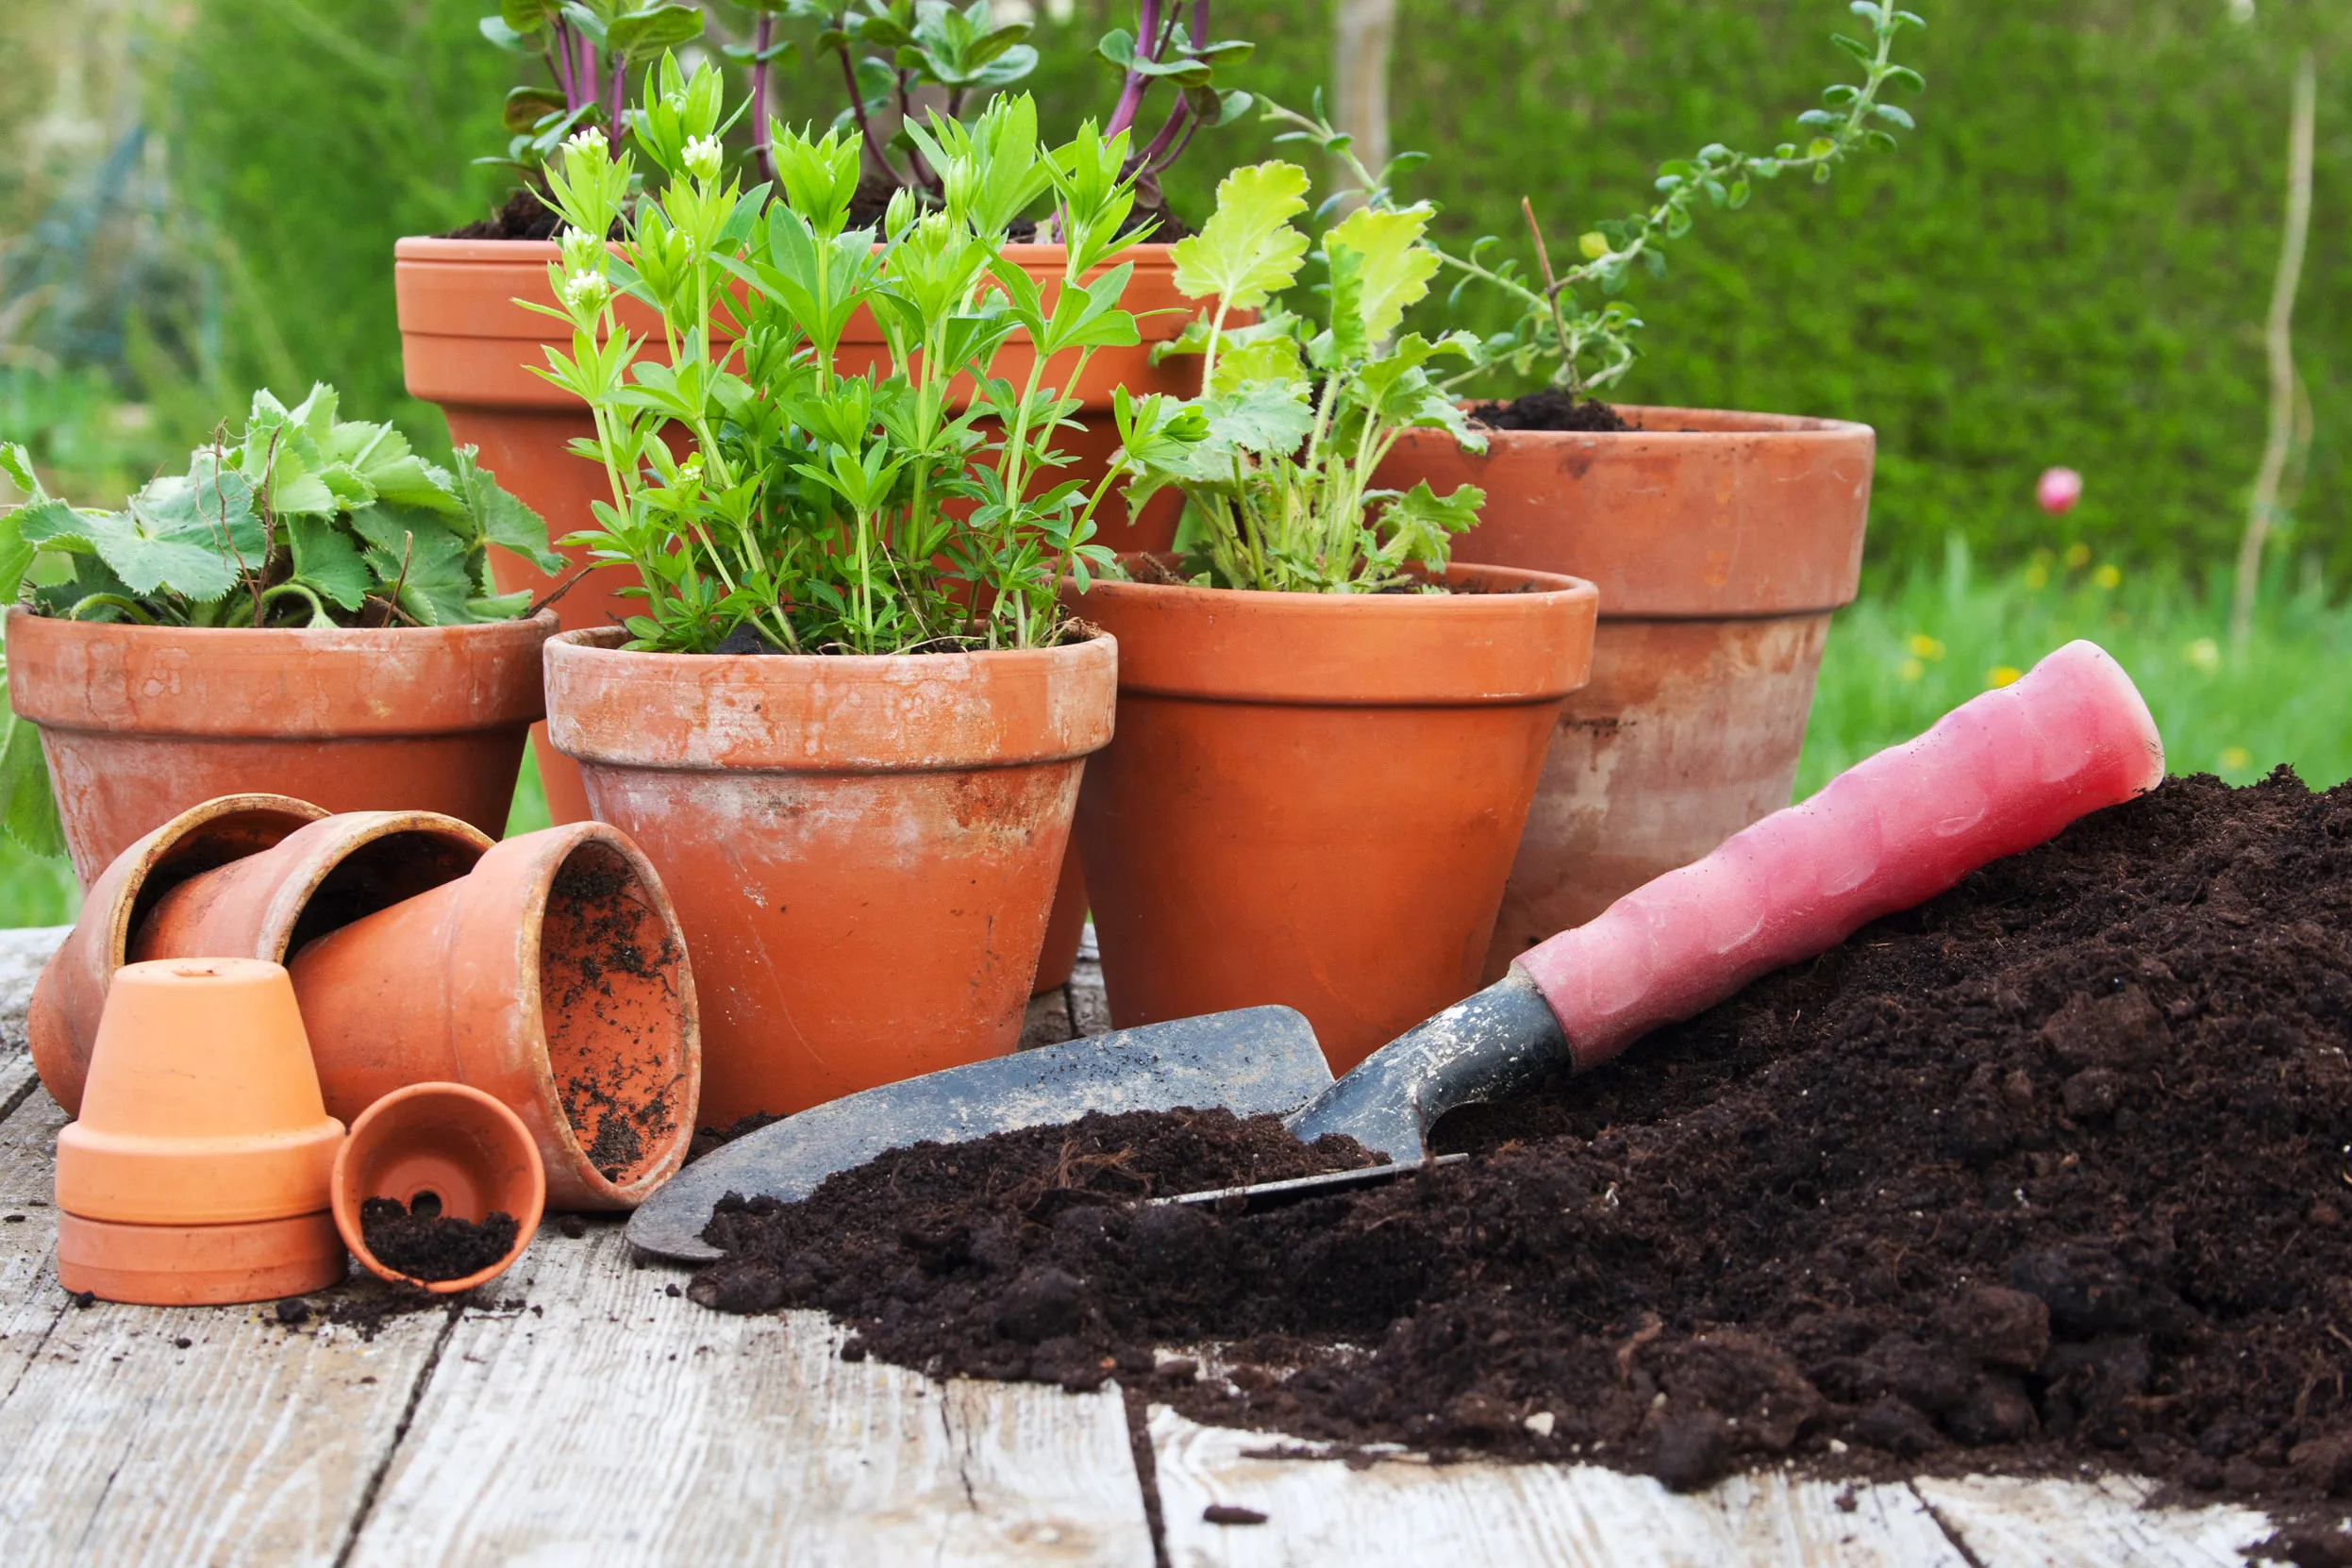 A small pile of compost, with a trowel on top. Terracotta flower pots in the background, five of them are planted with green plants.